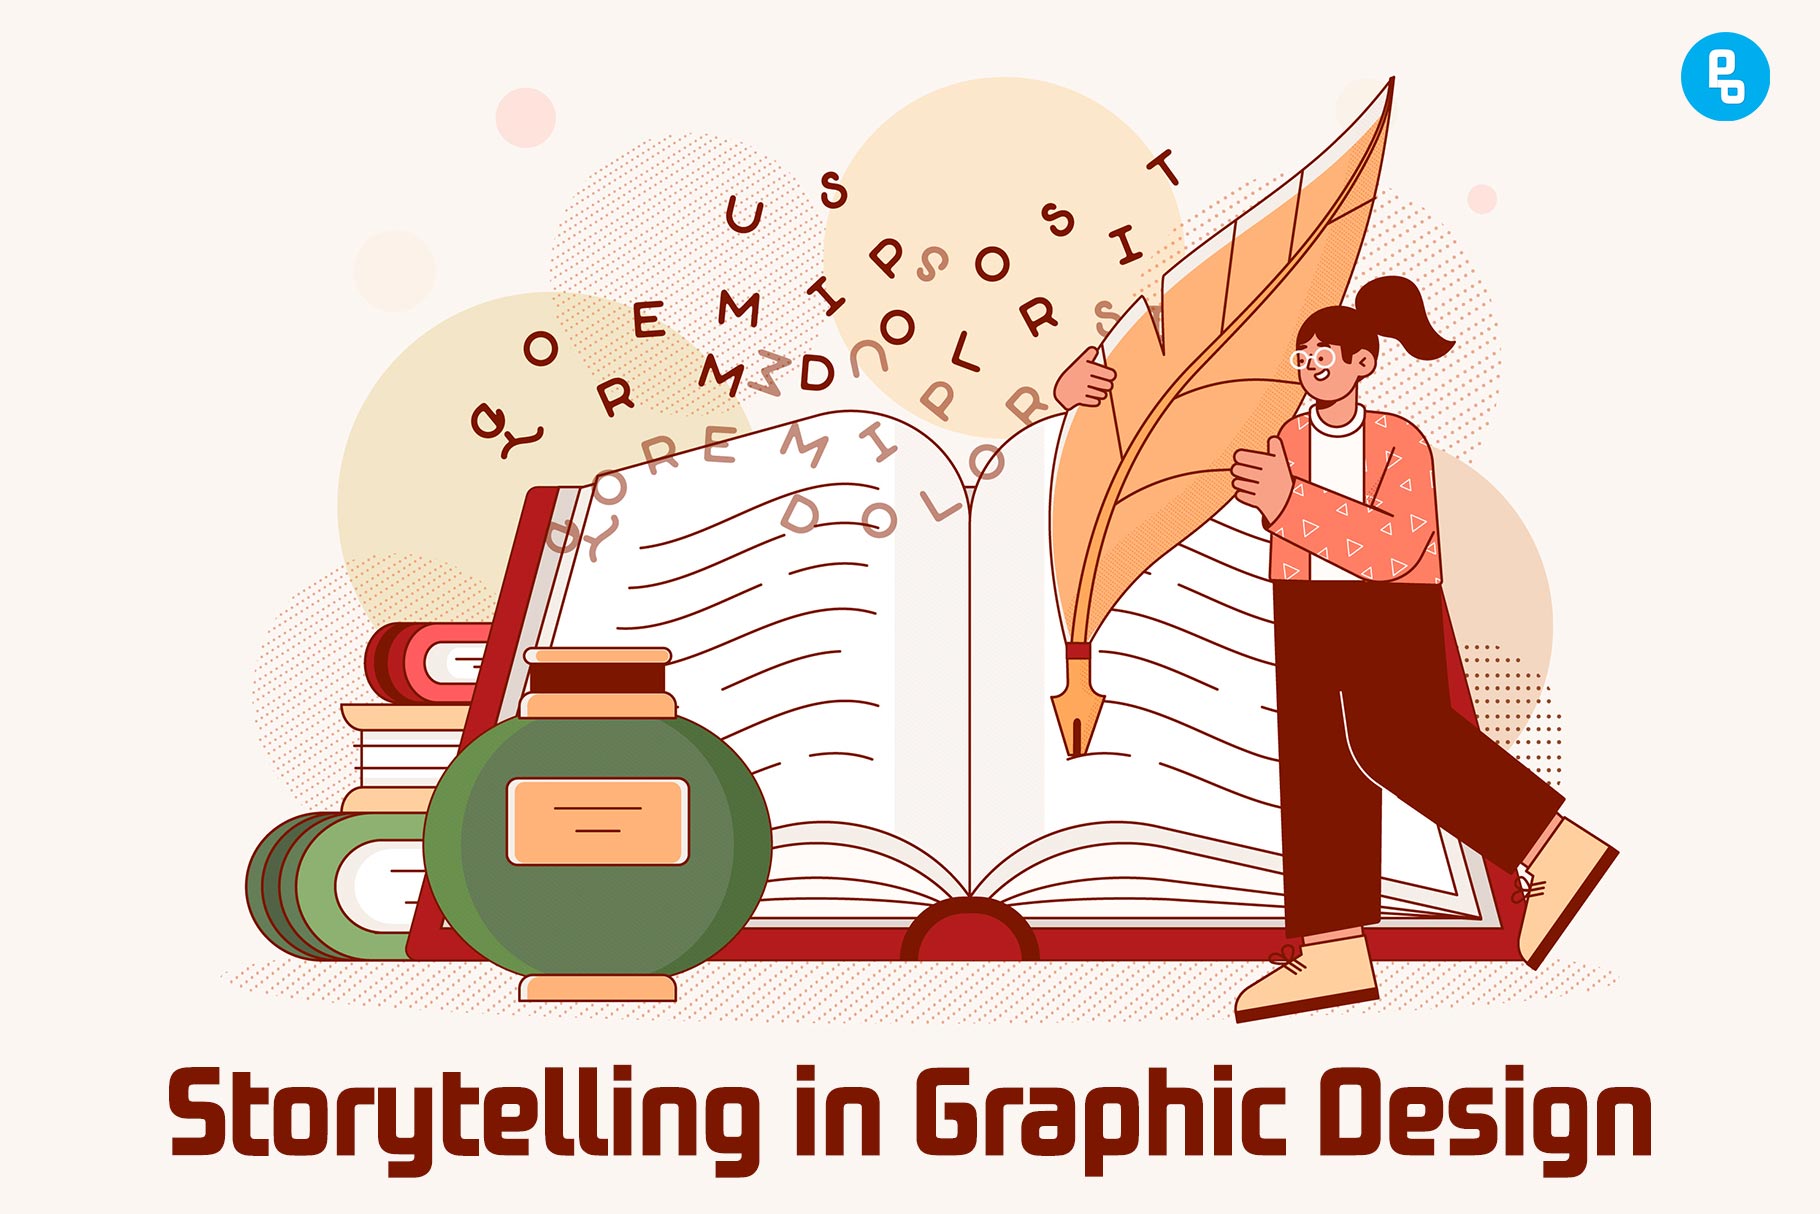 Storytelling: A Practical Tool in Graphic Design